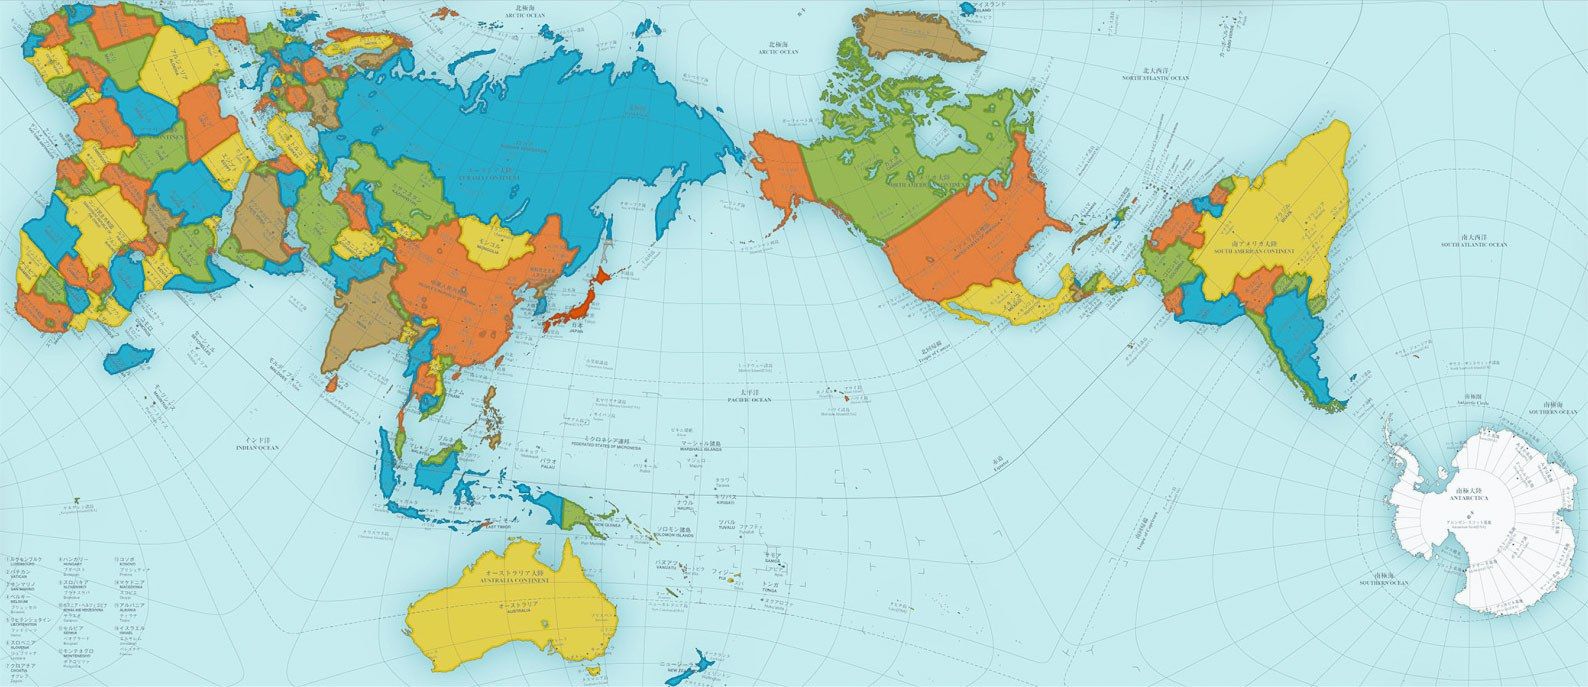 Which countries on the world map have the most unrecognizable